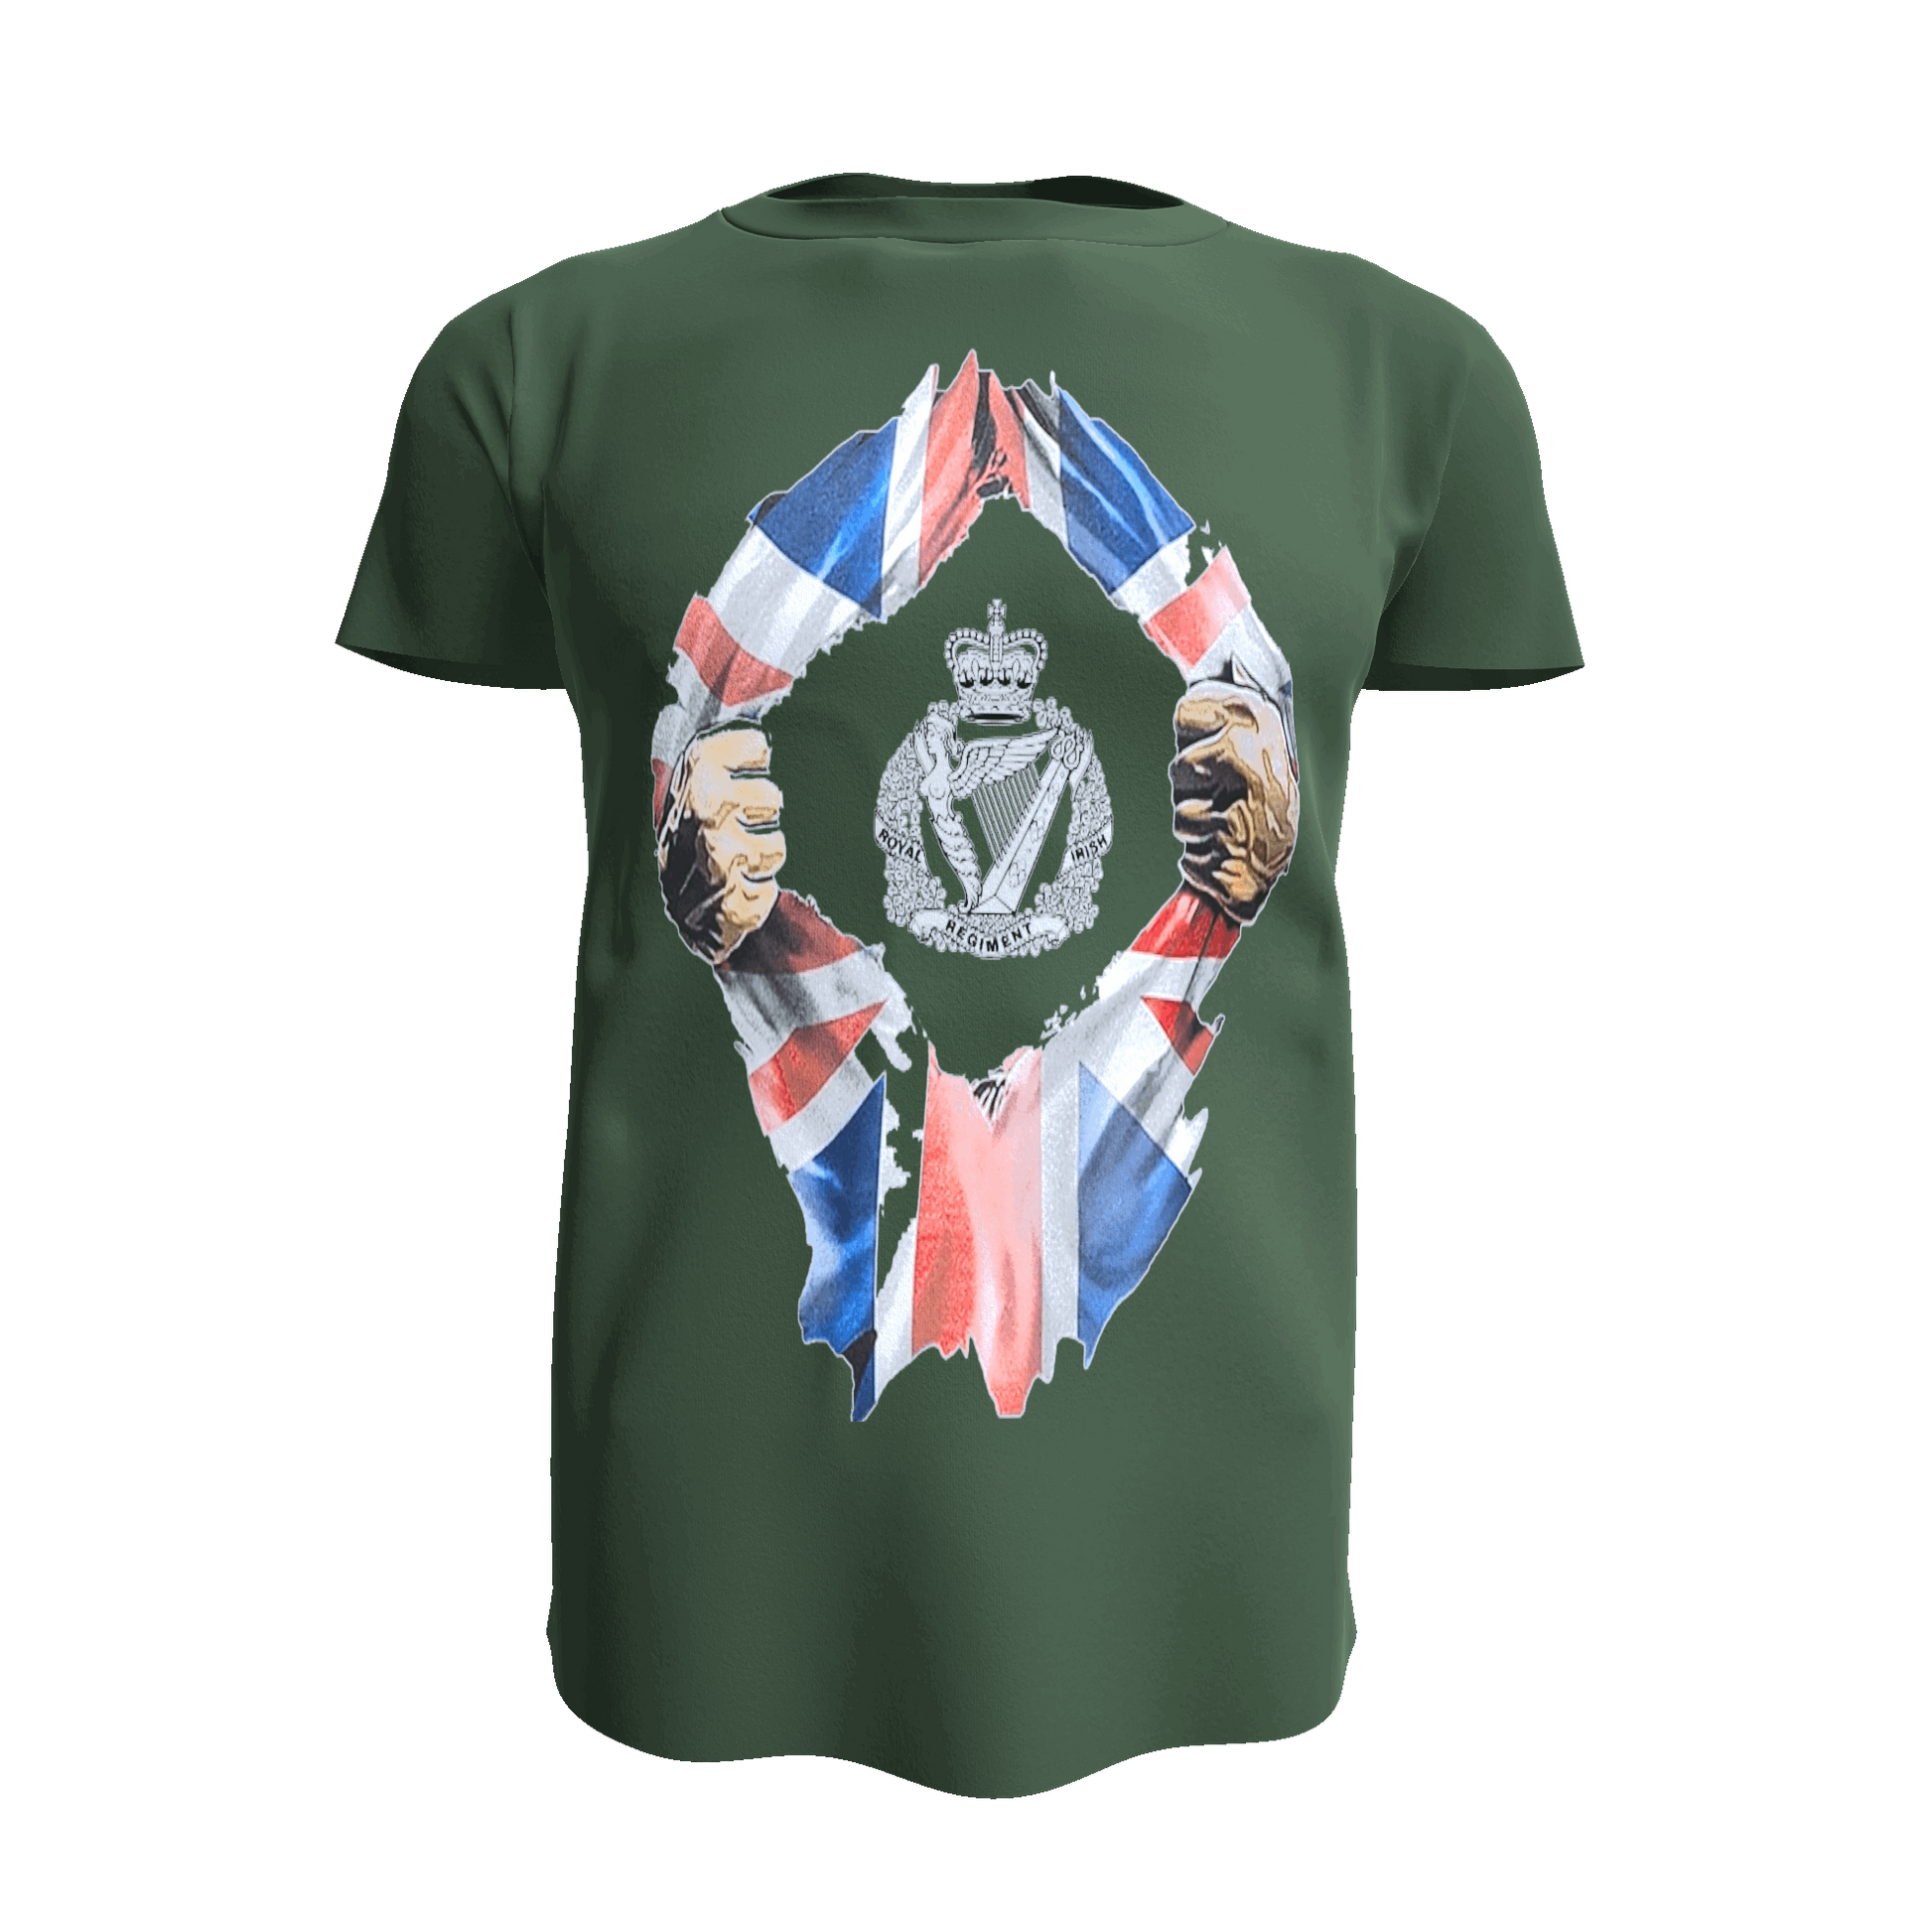 Breakout Royal Irish Regiment logo 2 - Army 1157 kit S / Green Army 1157 Kit Veterans Owned Business